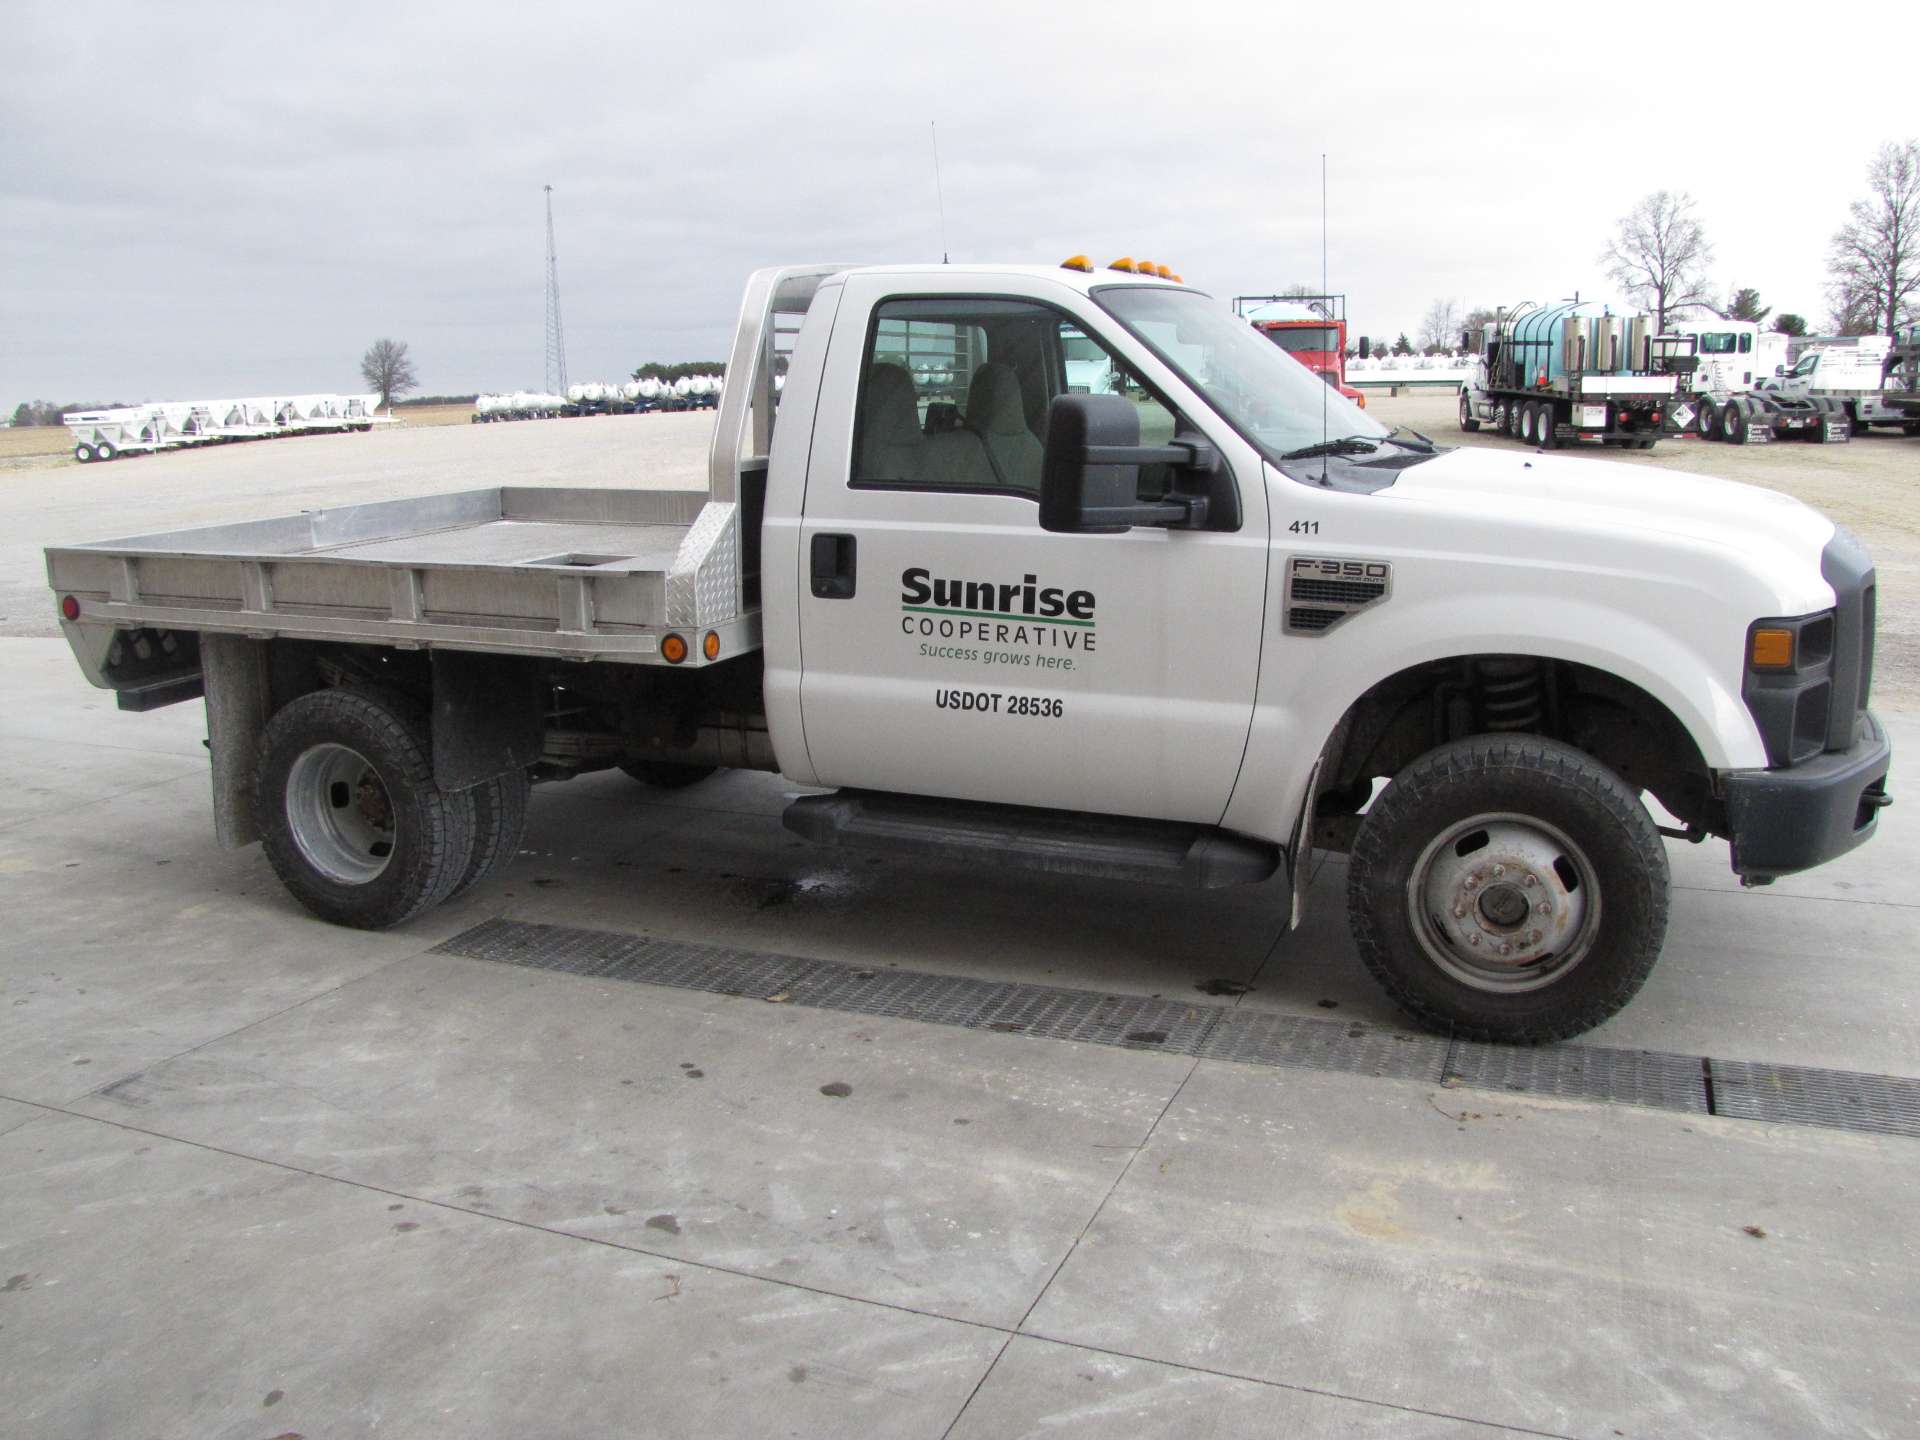 2009 Ford F350 XL Super Duty pickup truck - Image 10 of 55